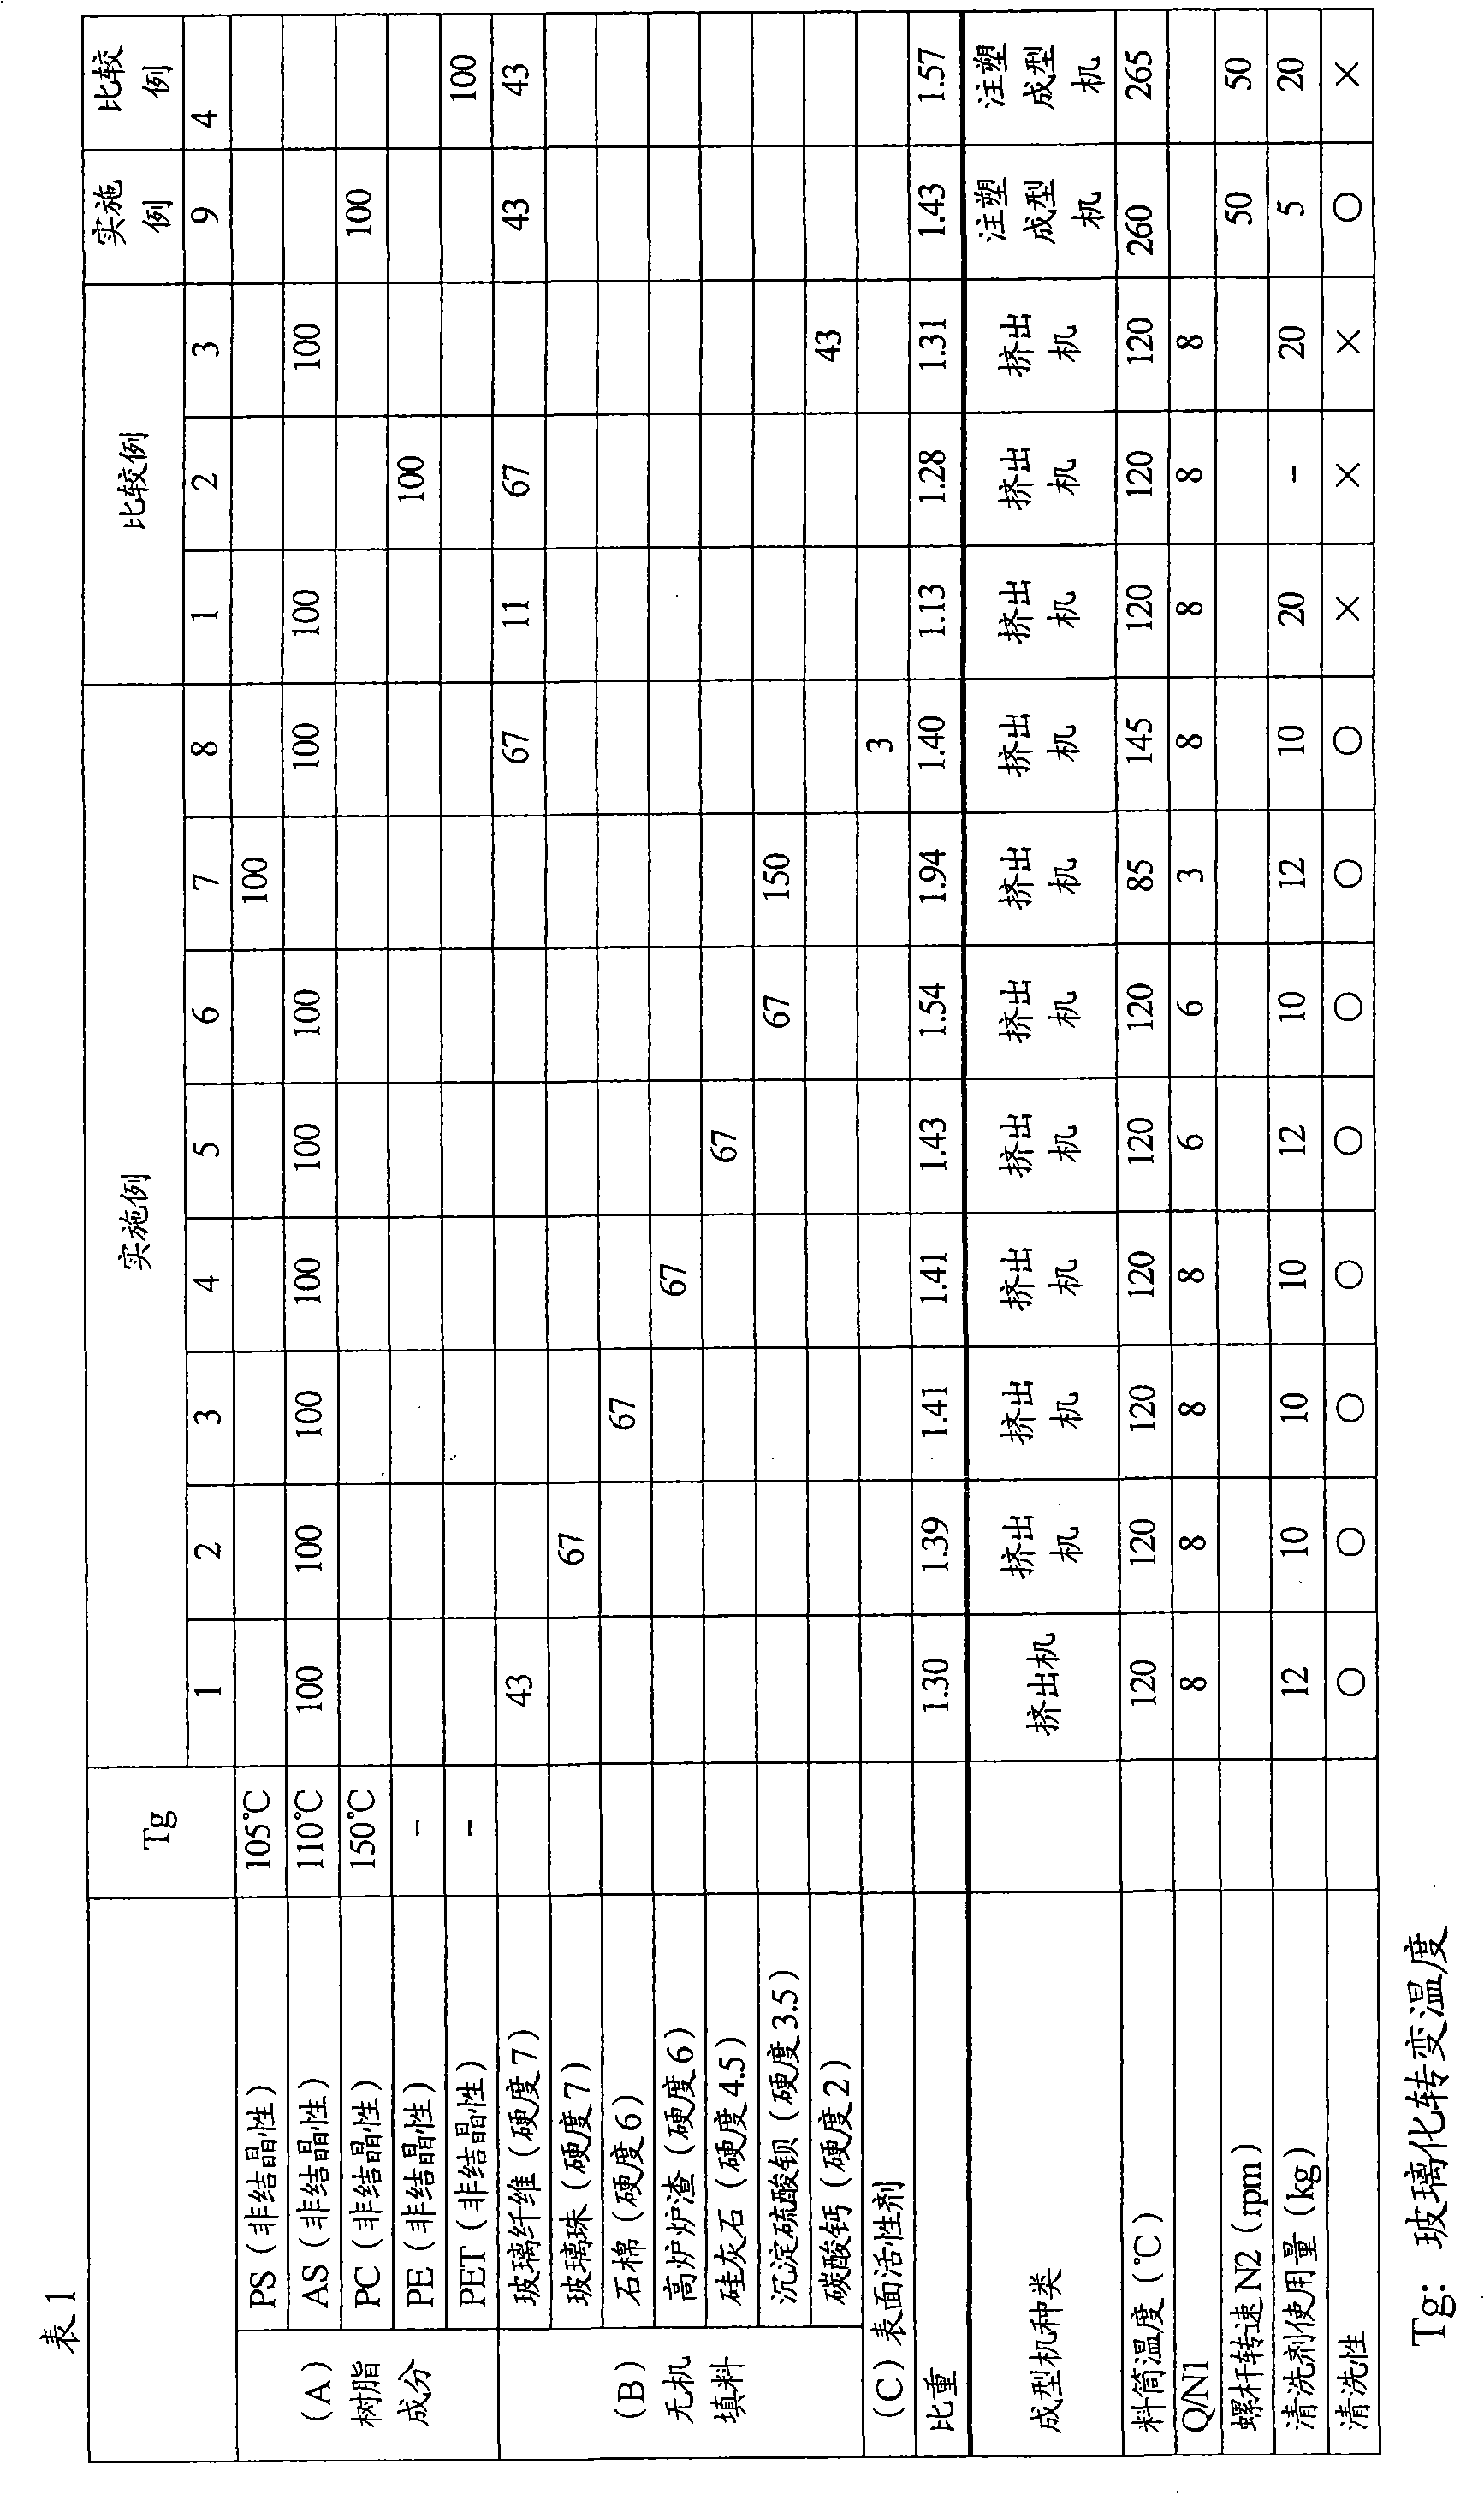 Detergent resin composition for shaping apparatus